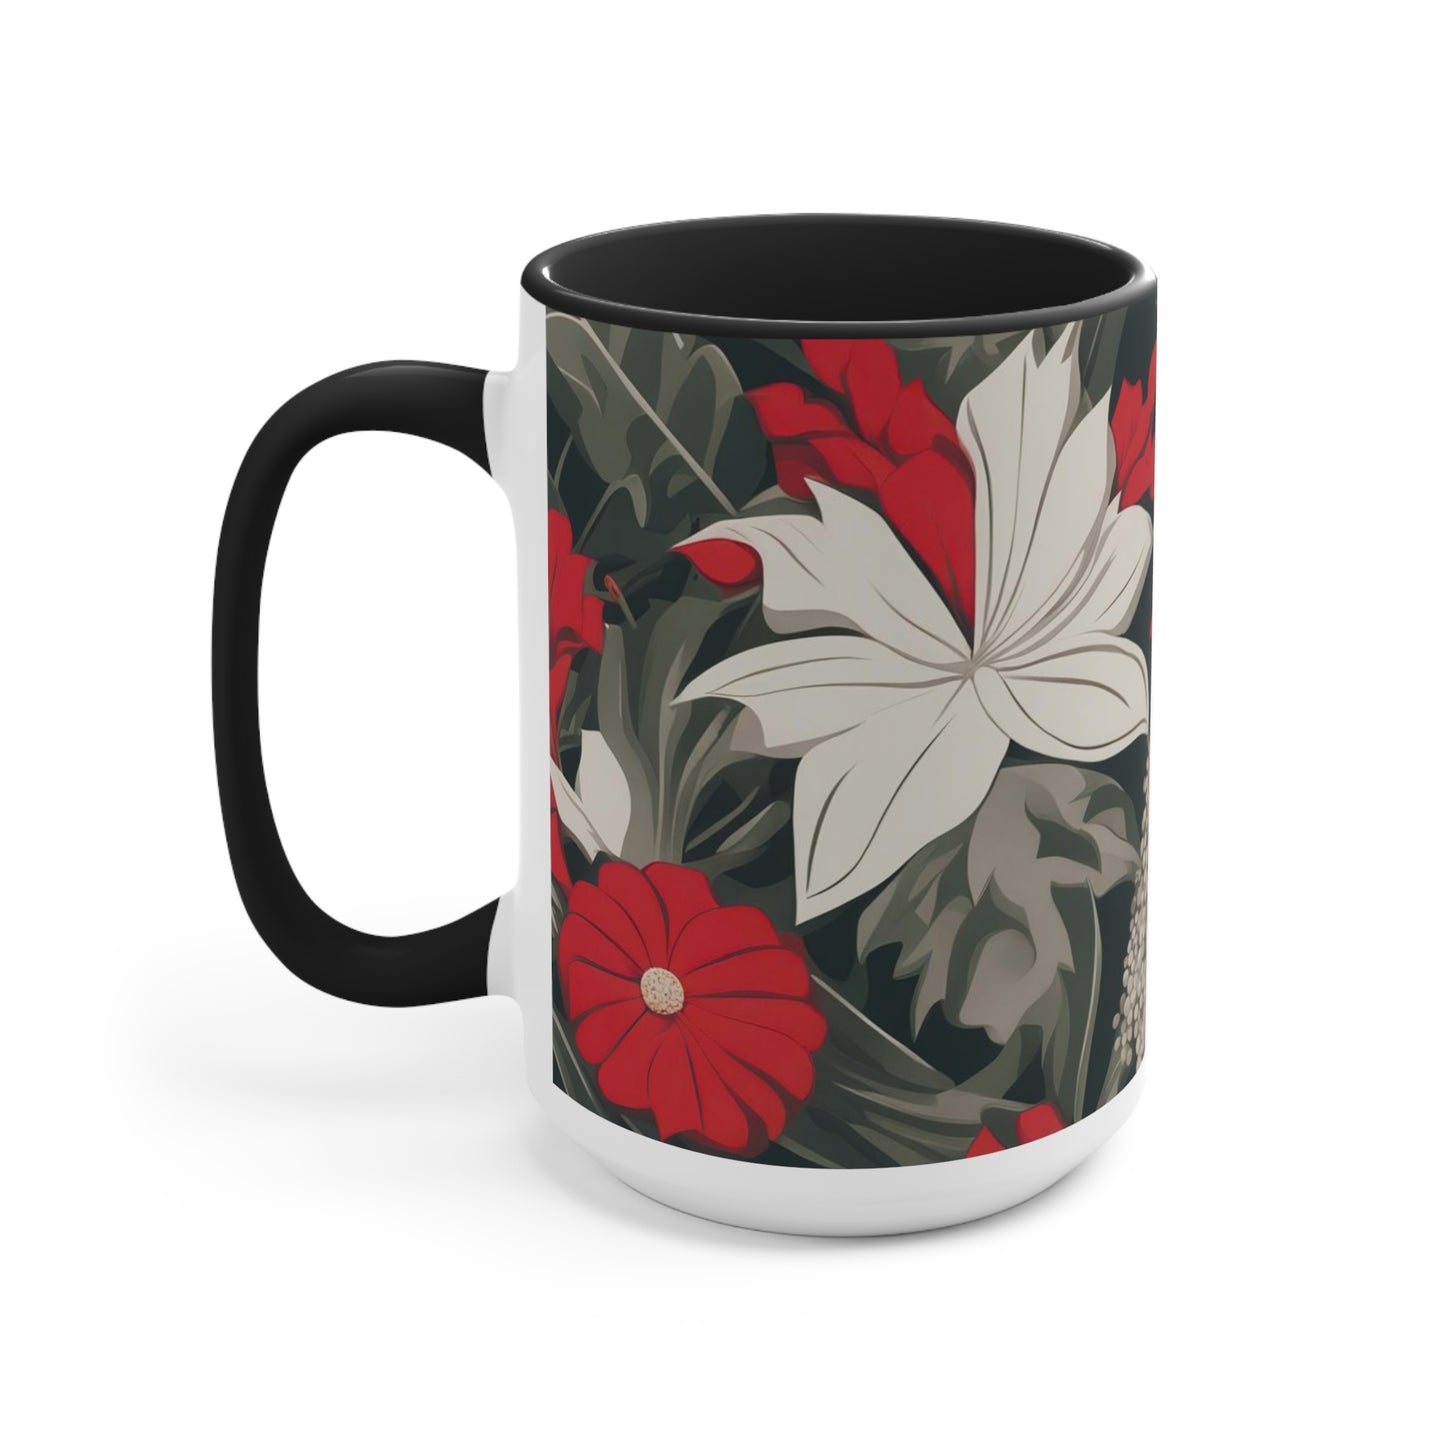 Red and White Flowers, Ceramic Mug - Perfect for Coffee, Tea, and More!